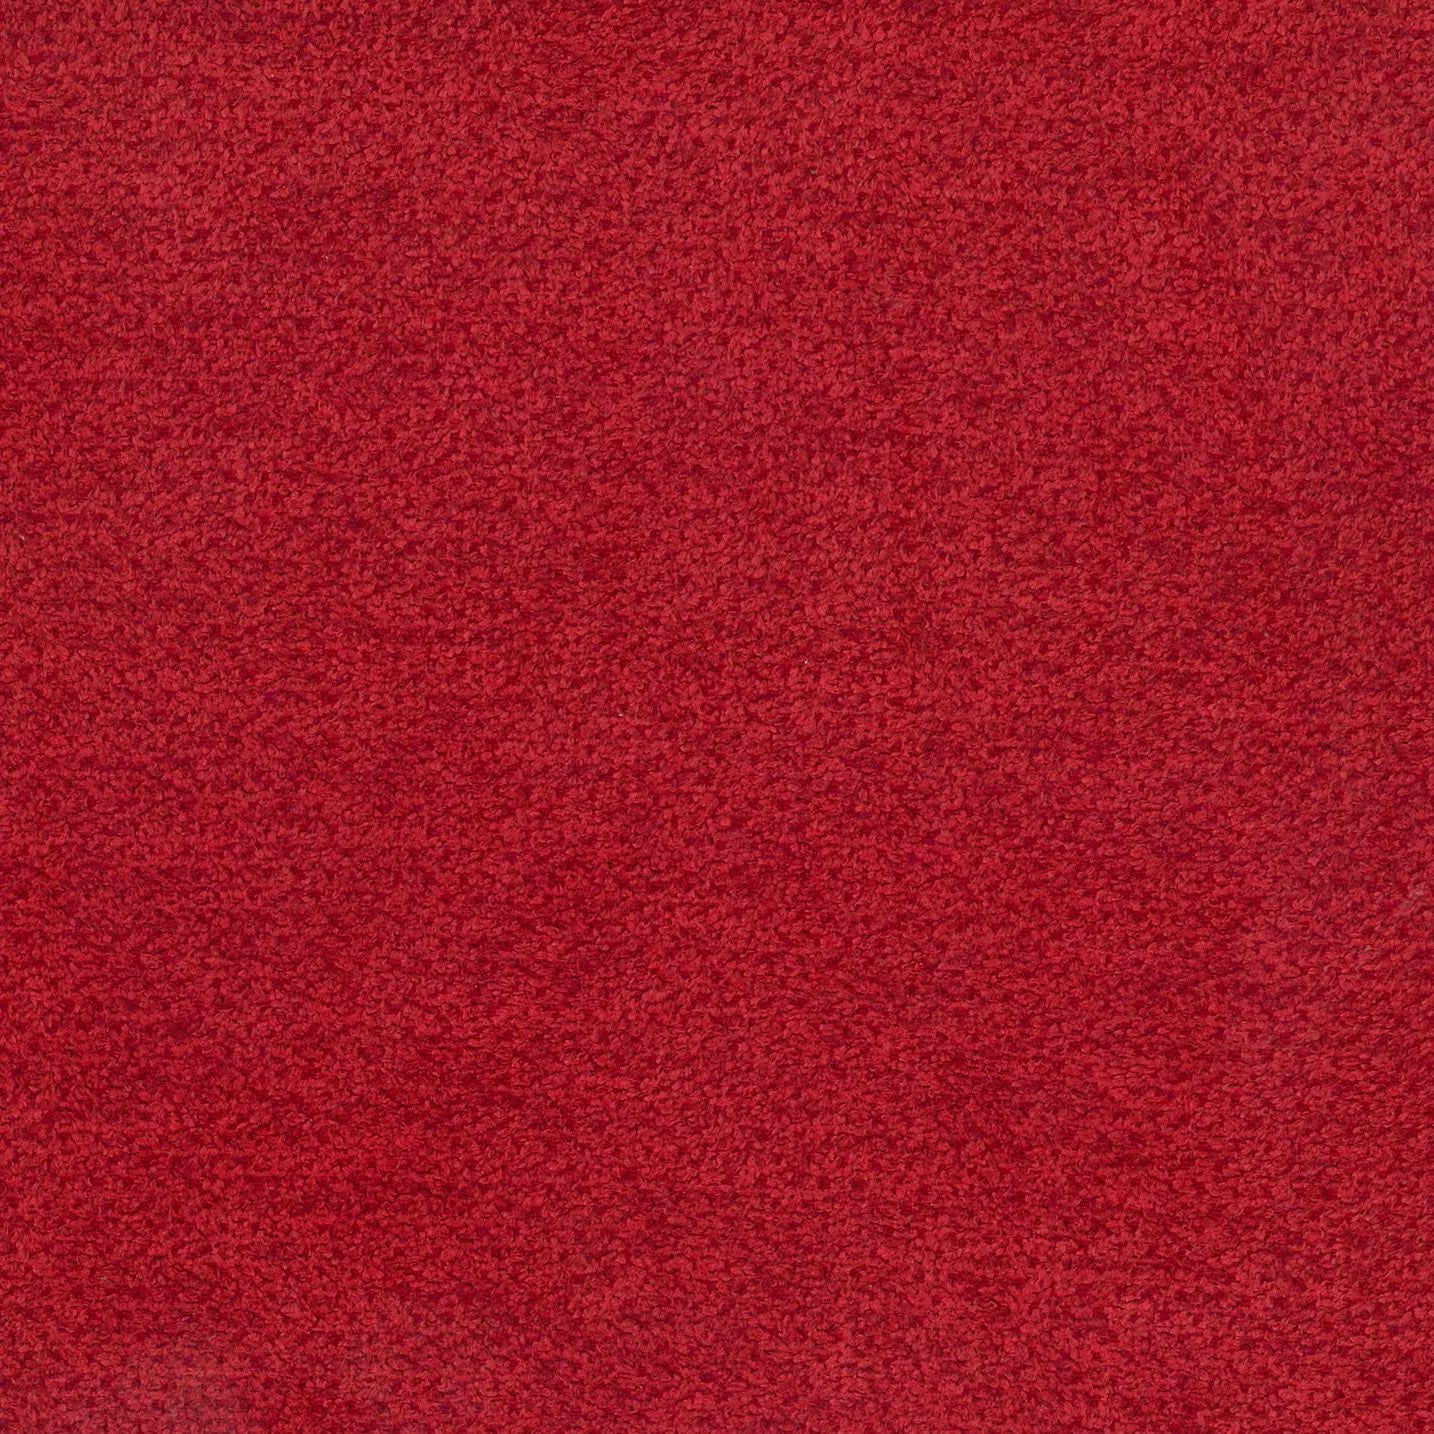 KINDRED SCARLET FABRIC SAMPLE | VALUE COLLECTION